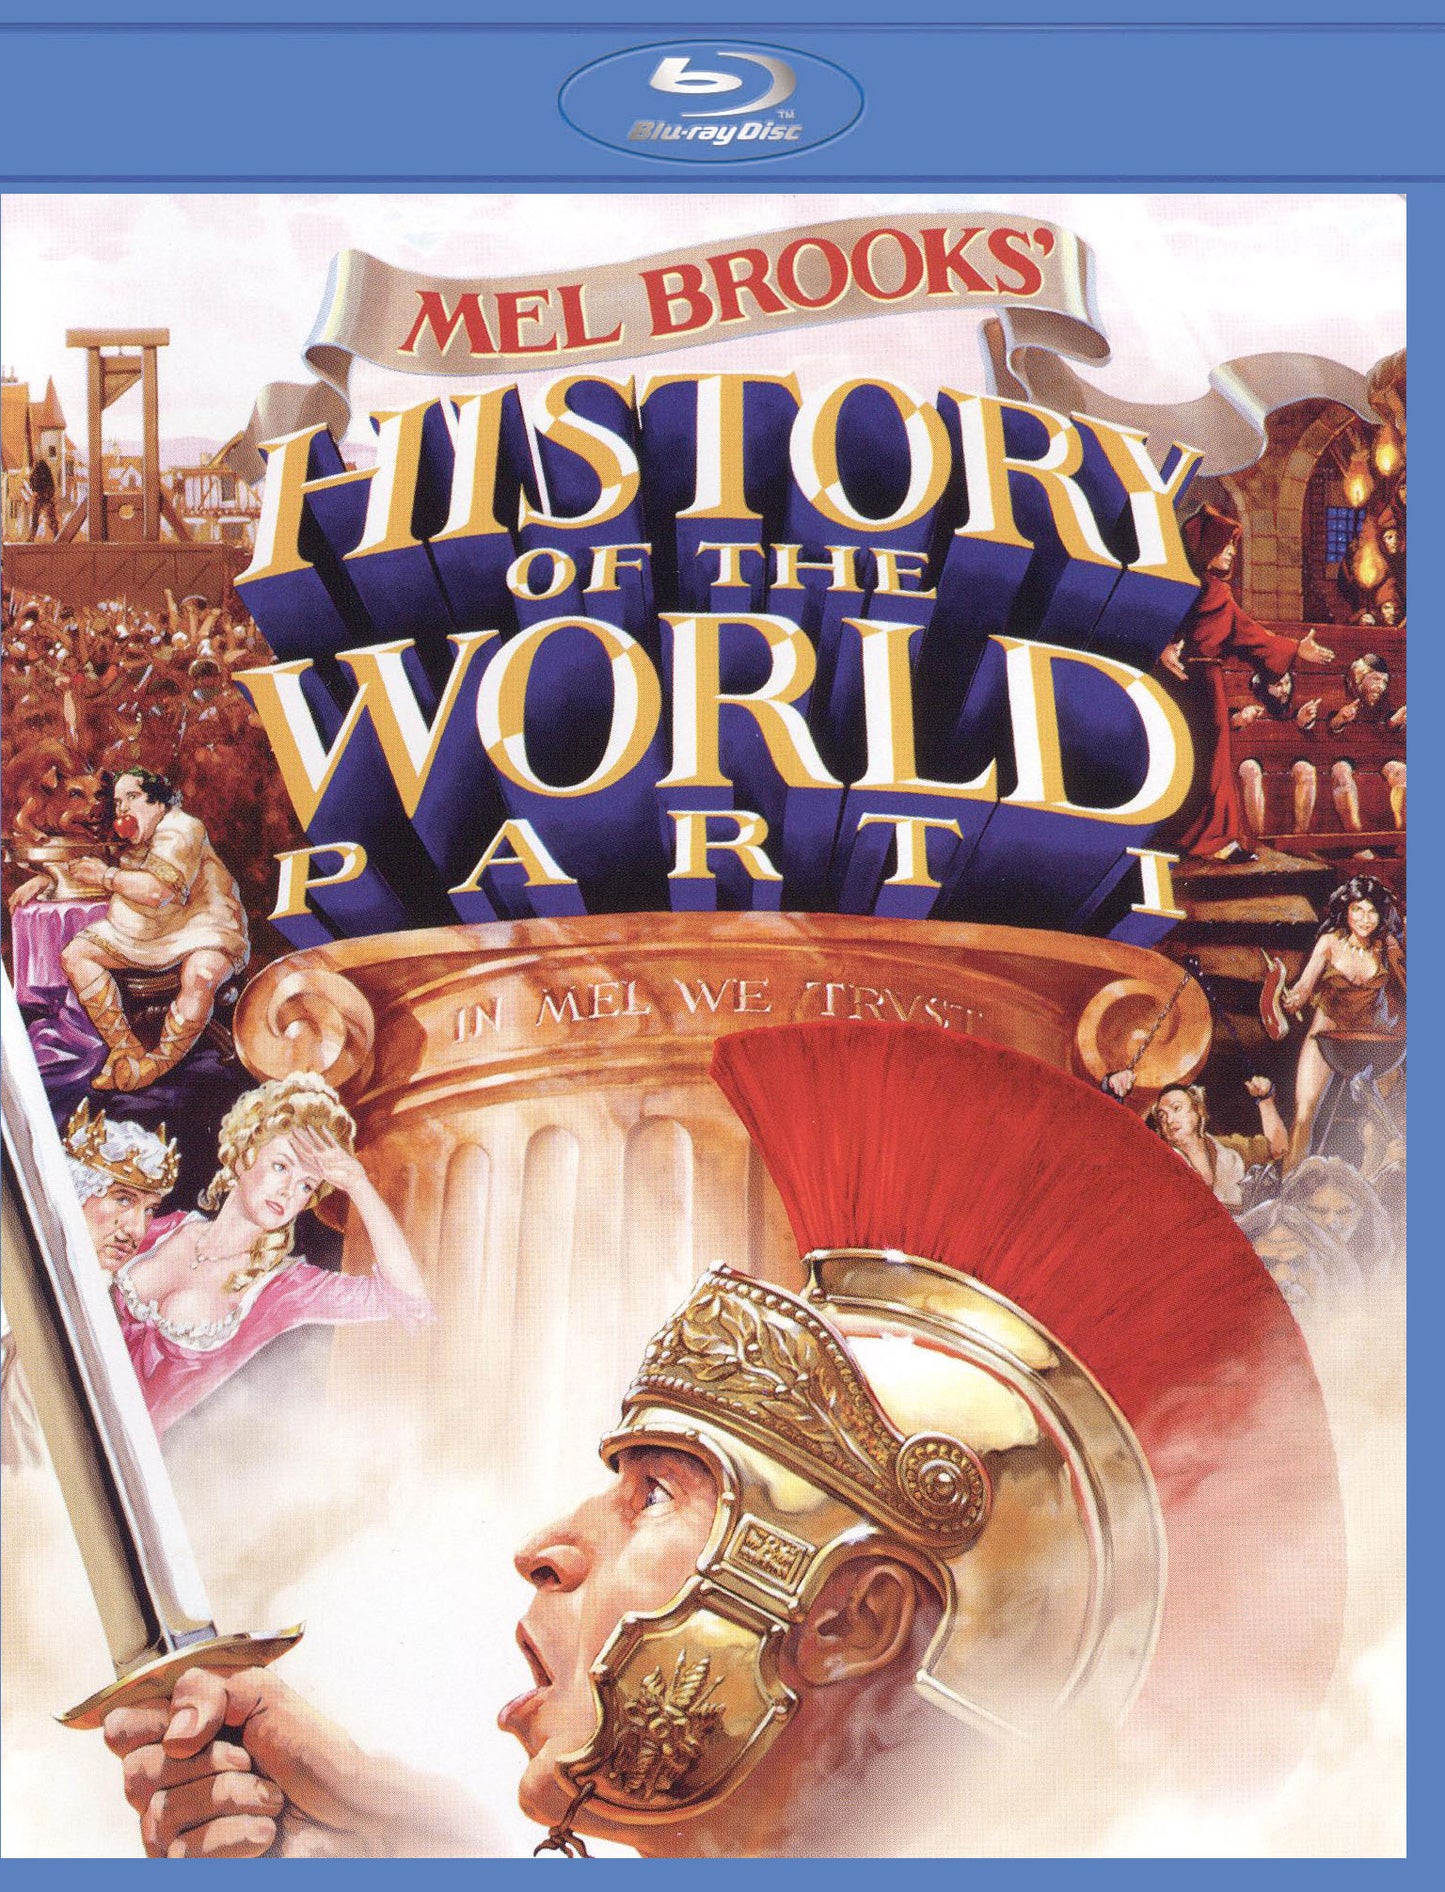 History of the World, Part I [Blu-ray] cover art